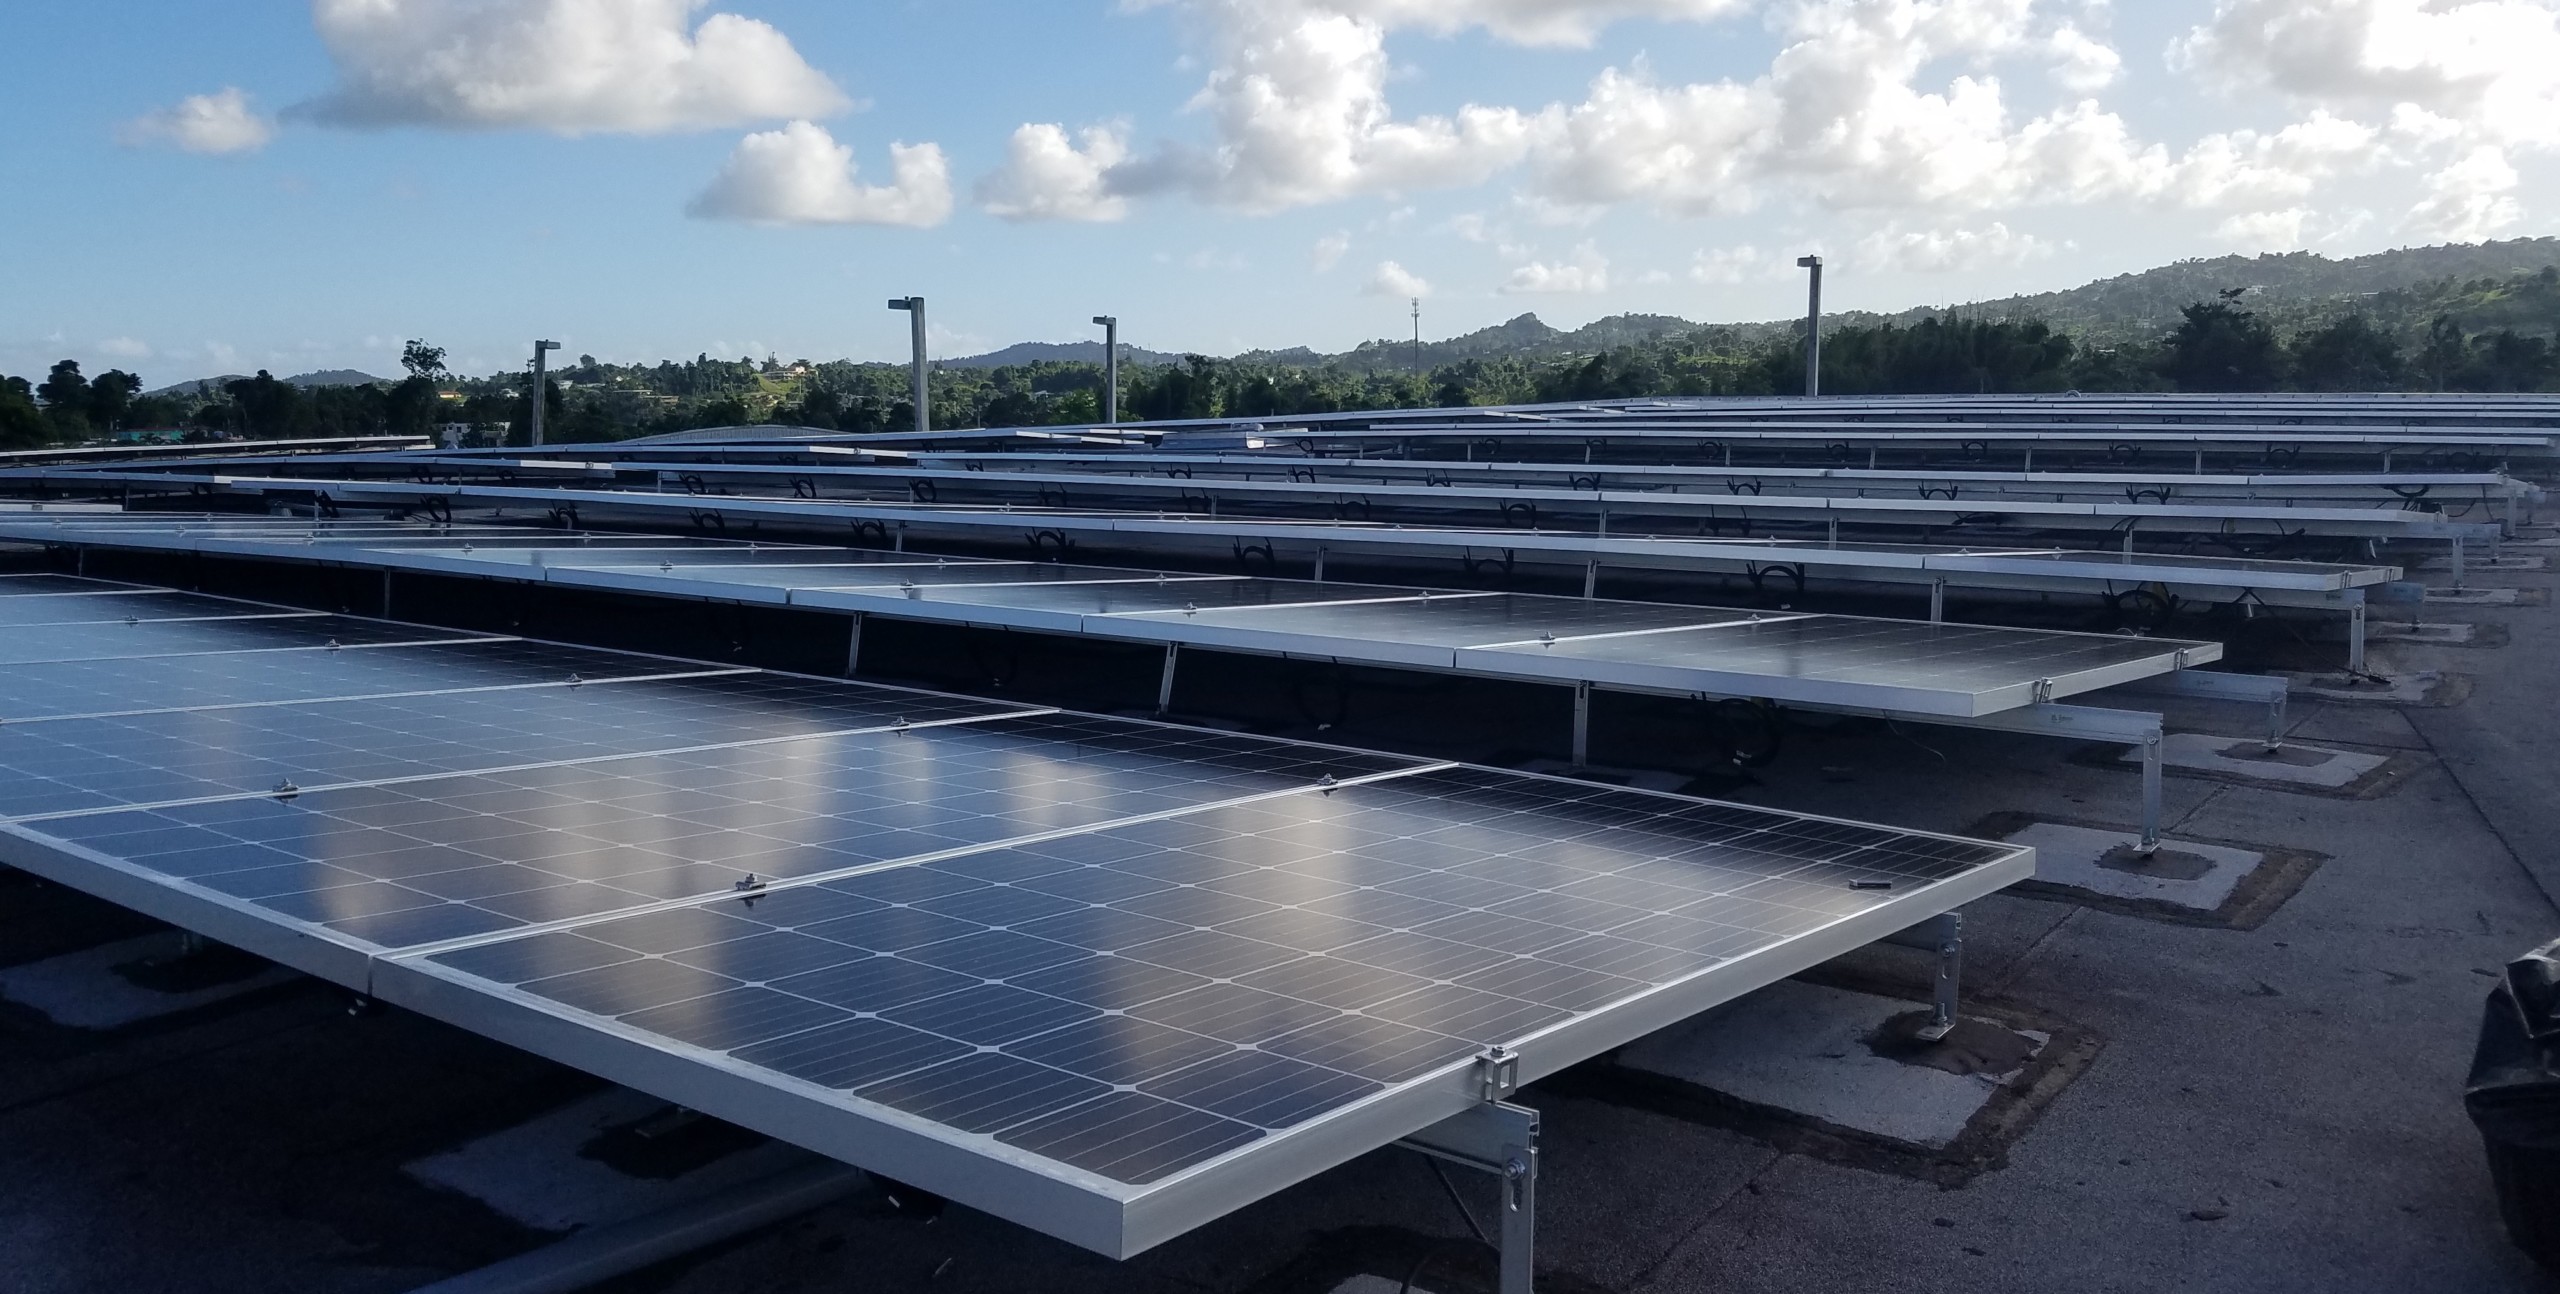 New Report: How to Finance Puerto Rico’s Solar Energy Future